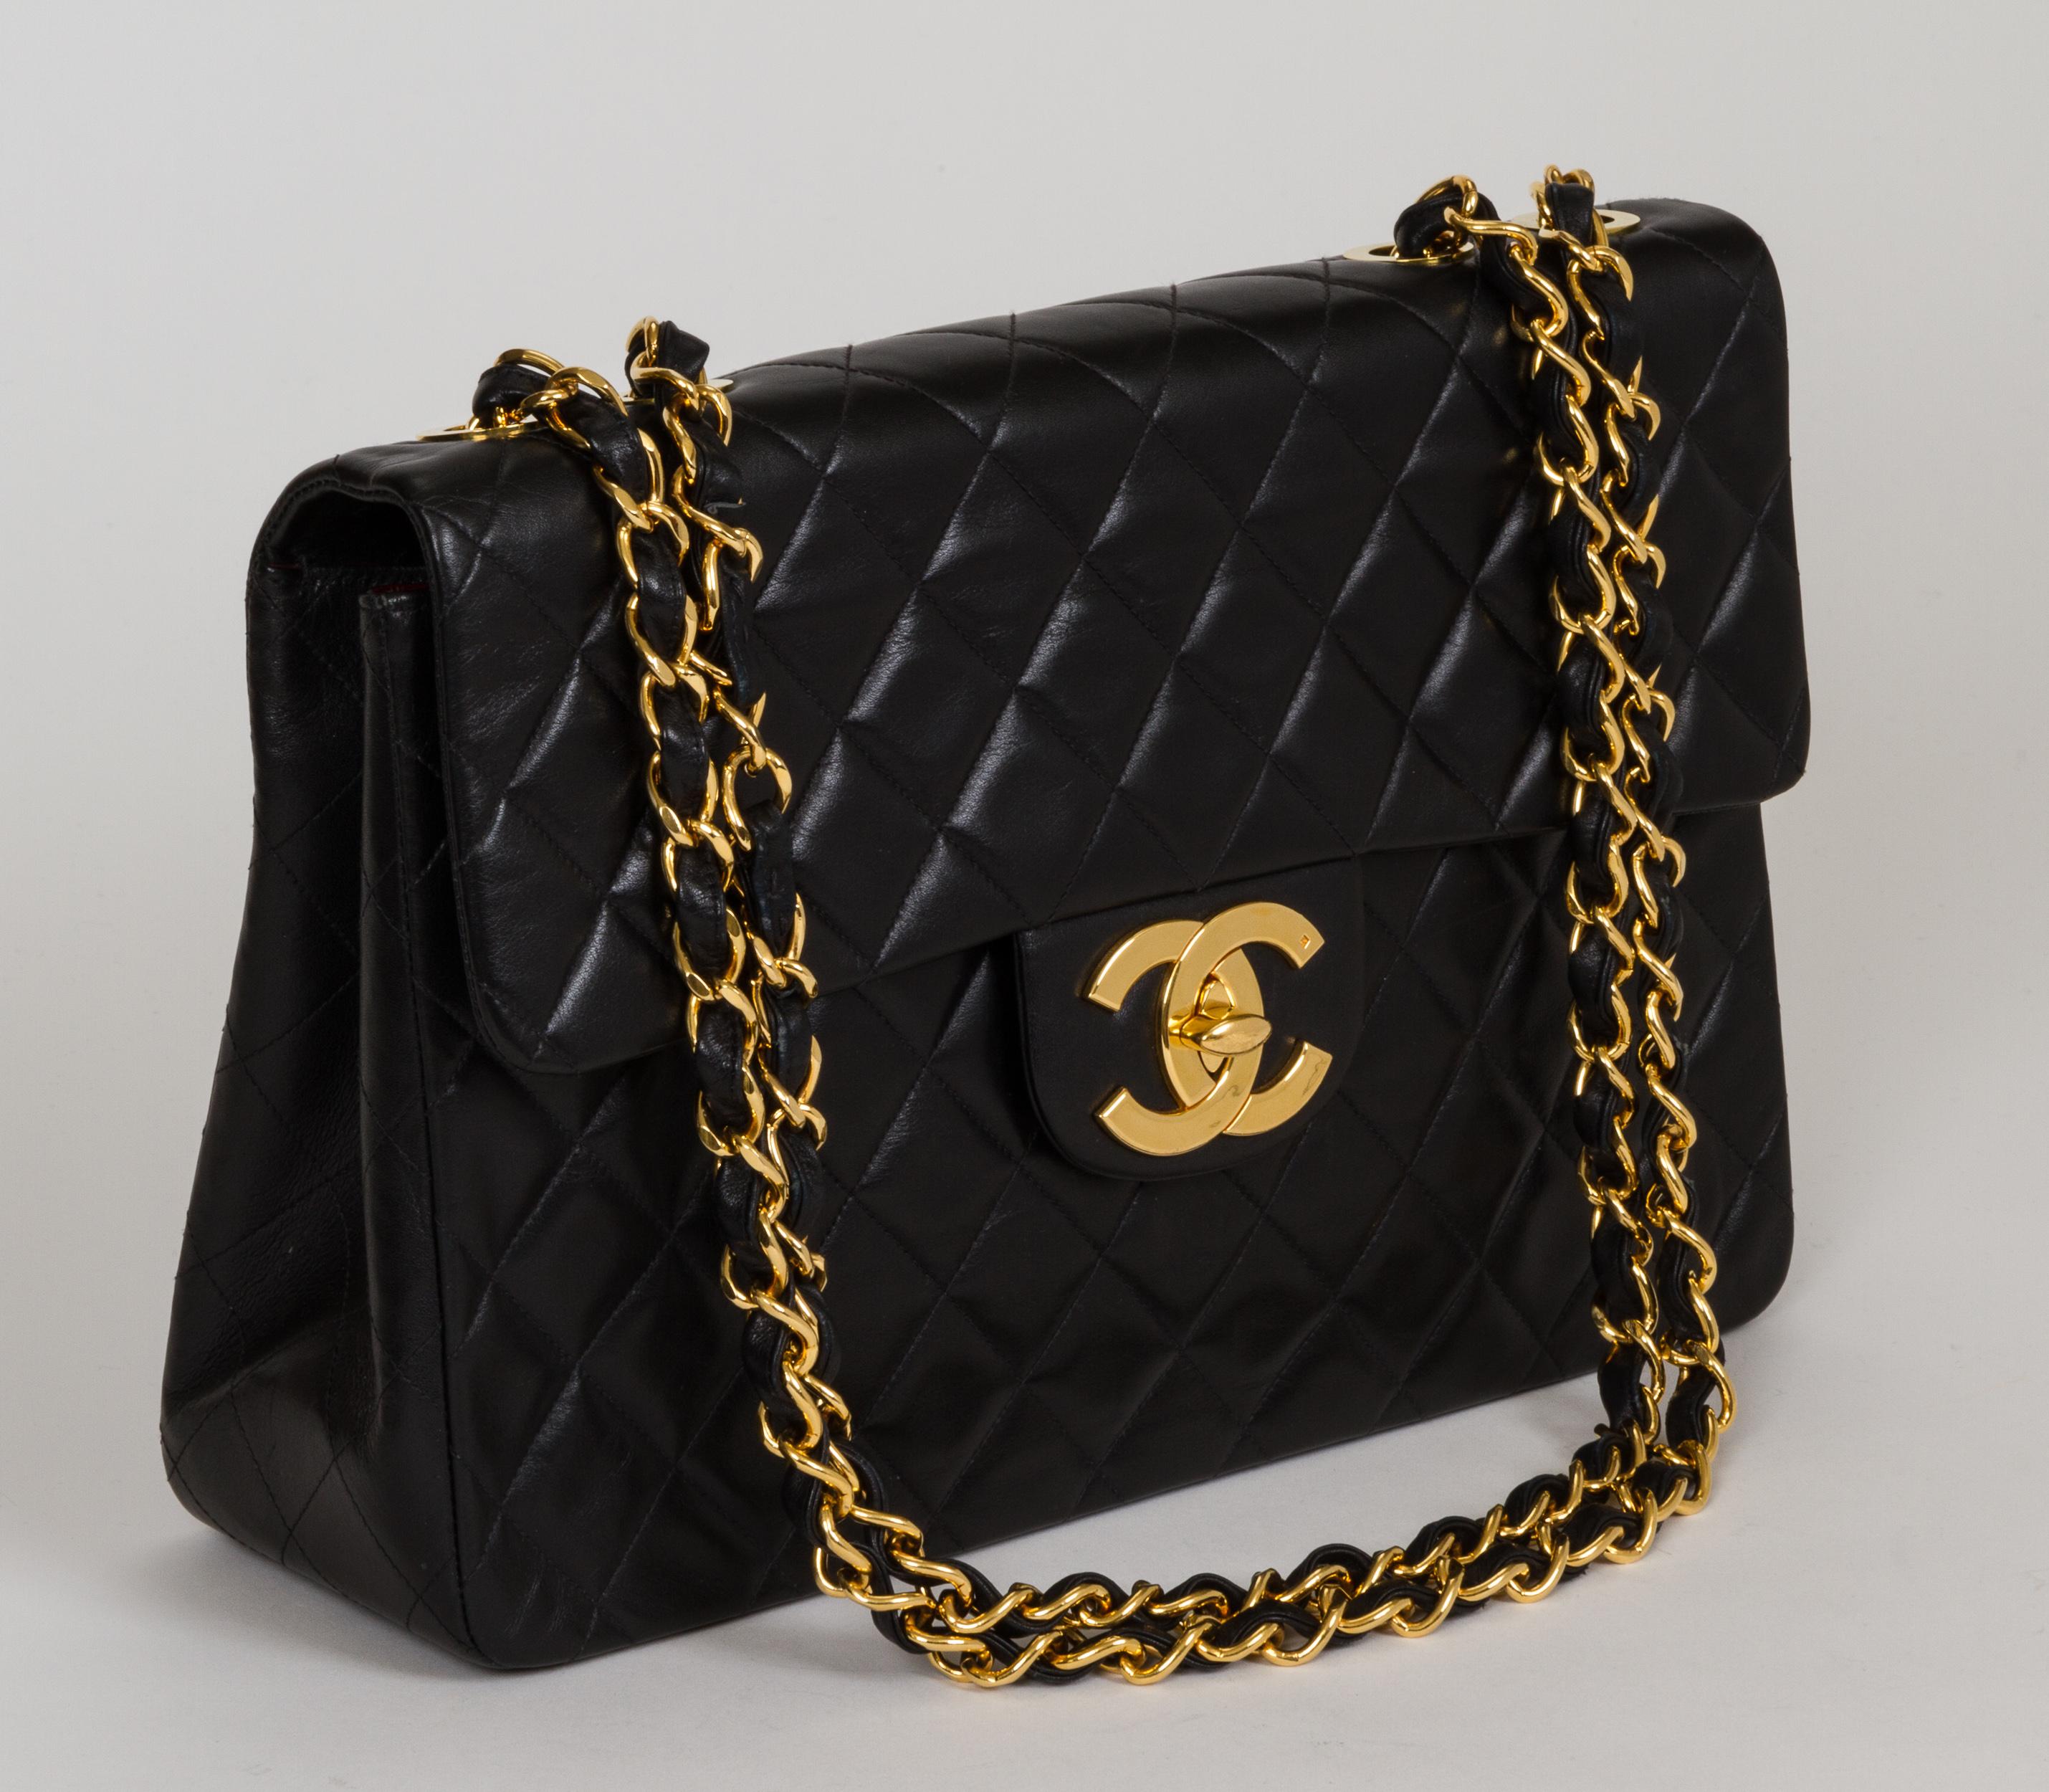 Vintage Chanel black quilted lambskin jumbo single-flap bag. Signature oversize CC logo turn-lock clap. Very good condition. Can be worn with strap long, 25